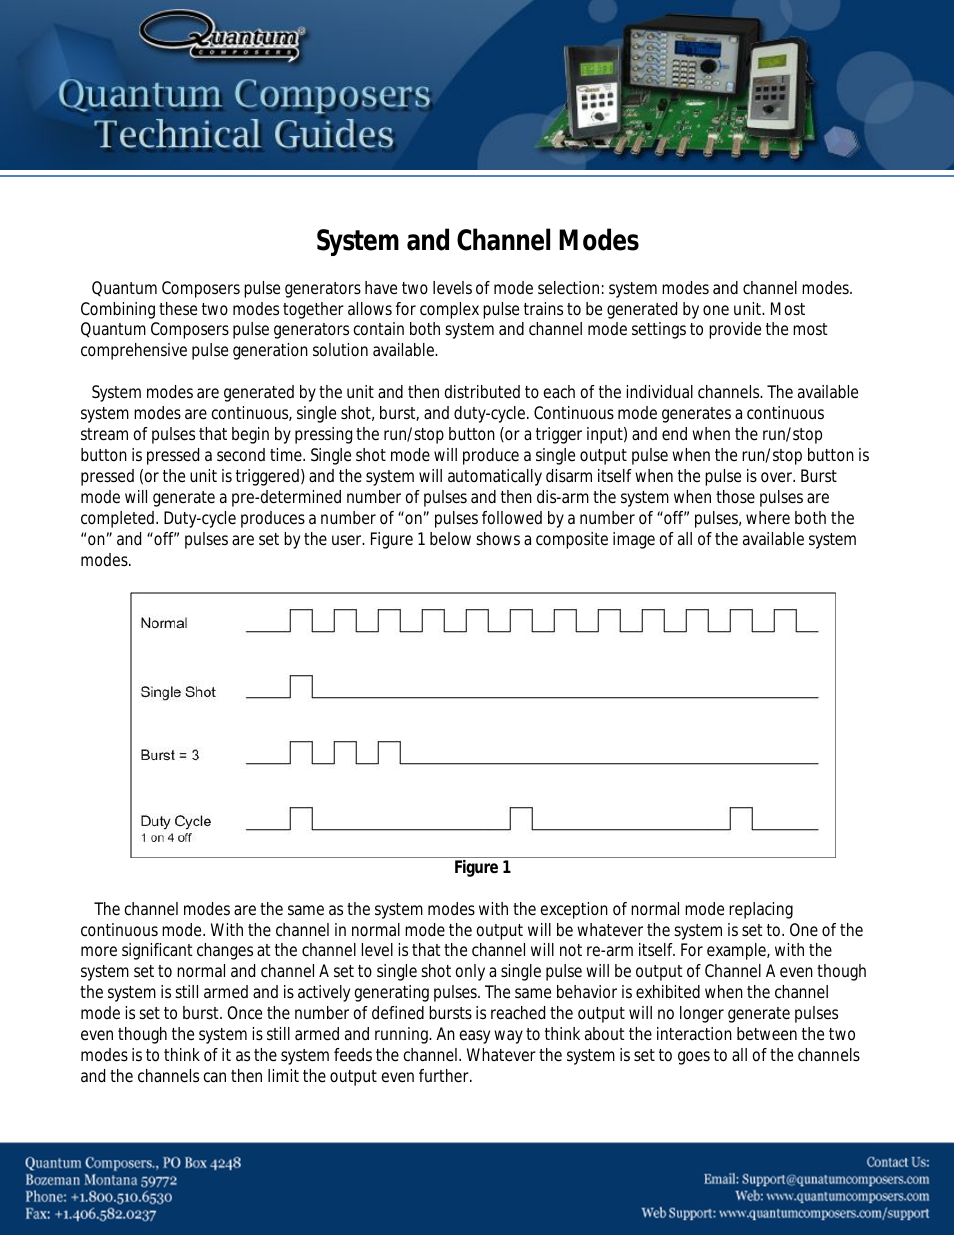 System and Channel Modes